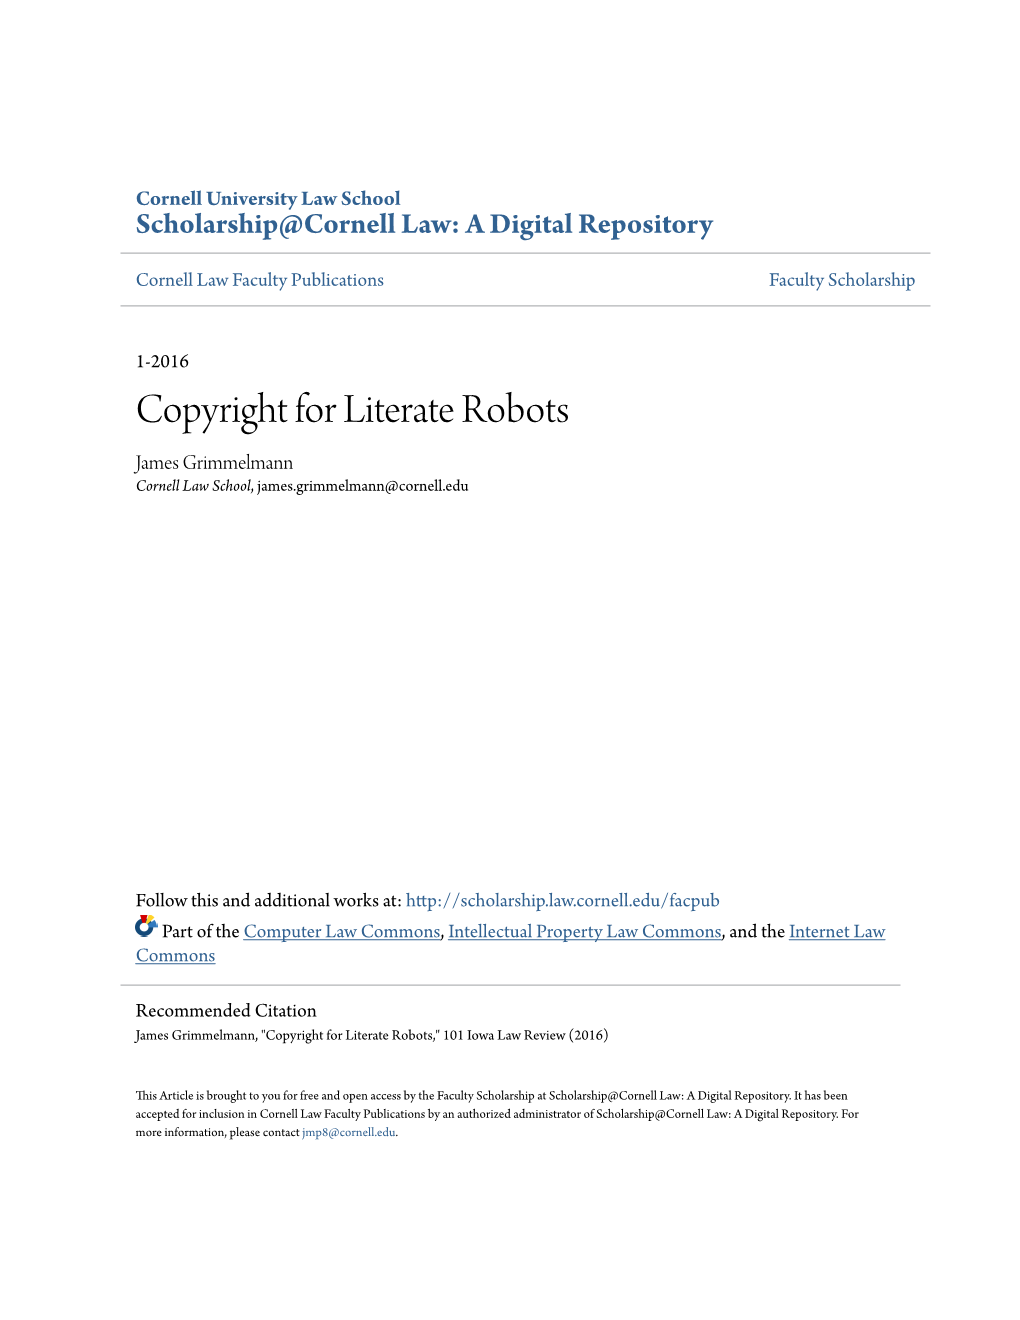 Copyright for Literate Robots James Grimmelmann Cornell Law School, James.Grimmelmann@Cornell.Edu